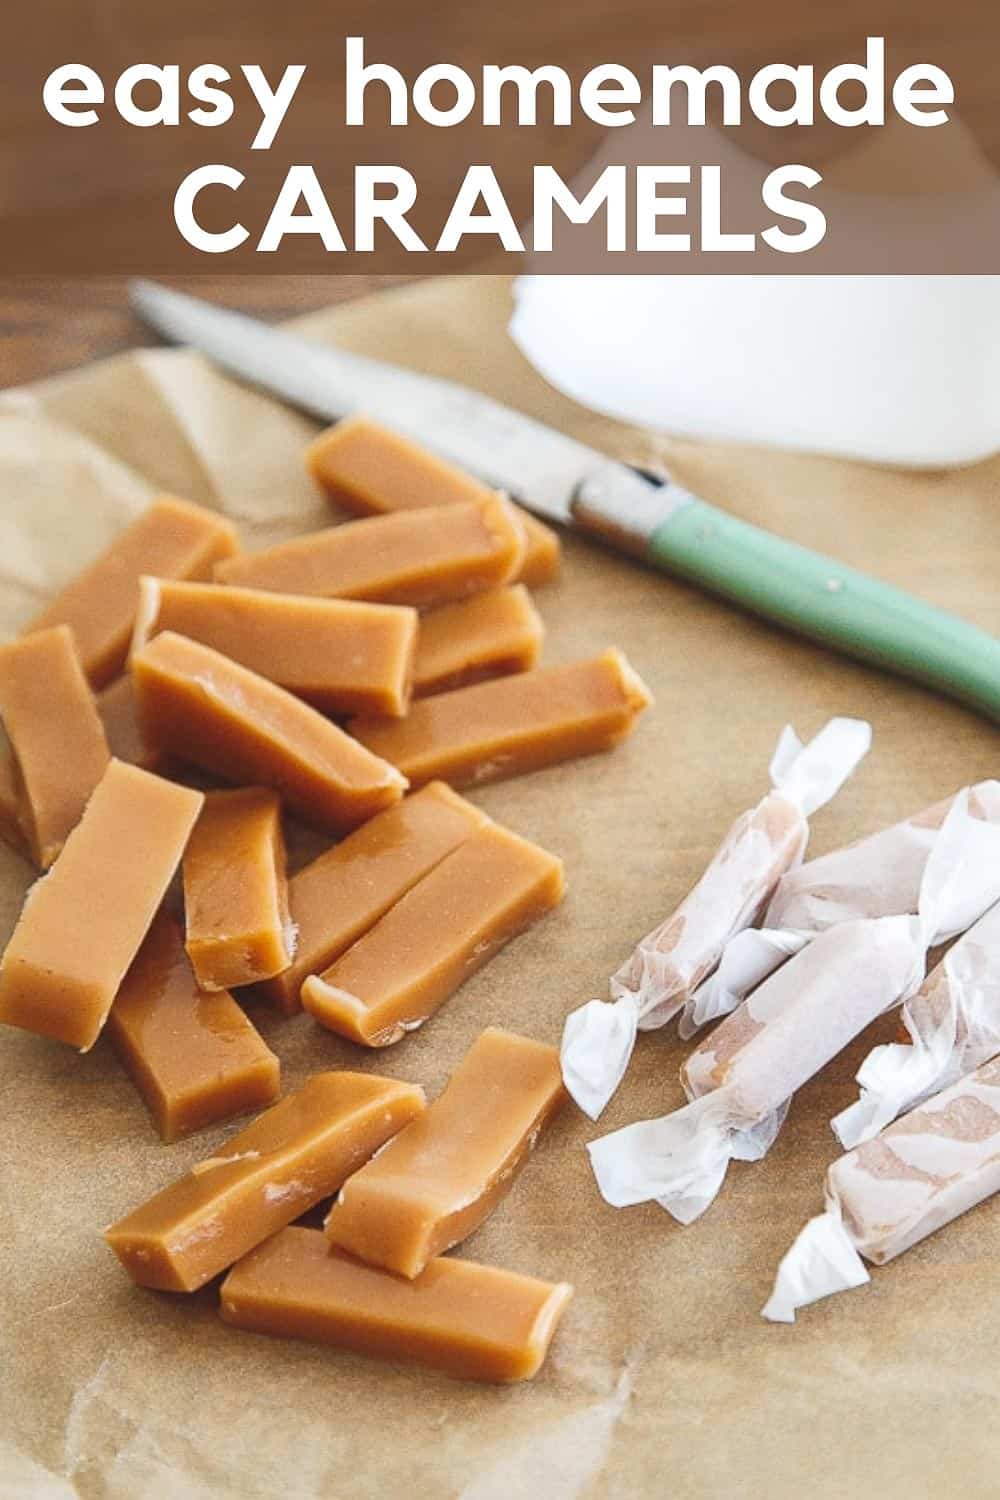 Homemade caramels from scratch, for a fun homemade holiday gift-giving! Surprisingly easy with one special tool!